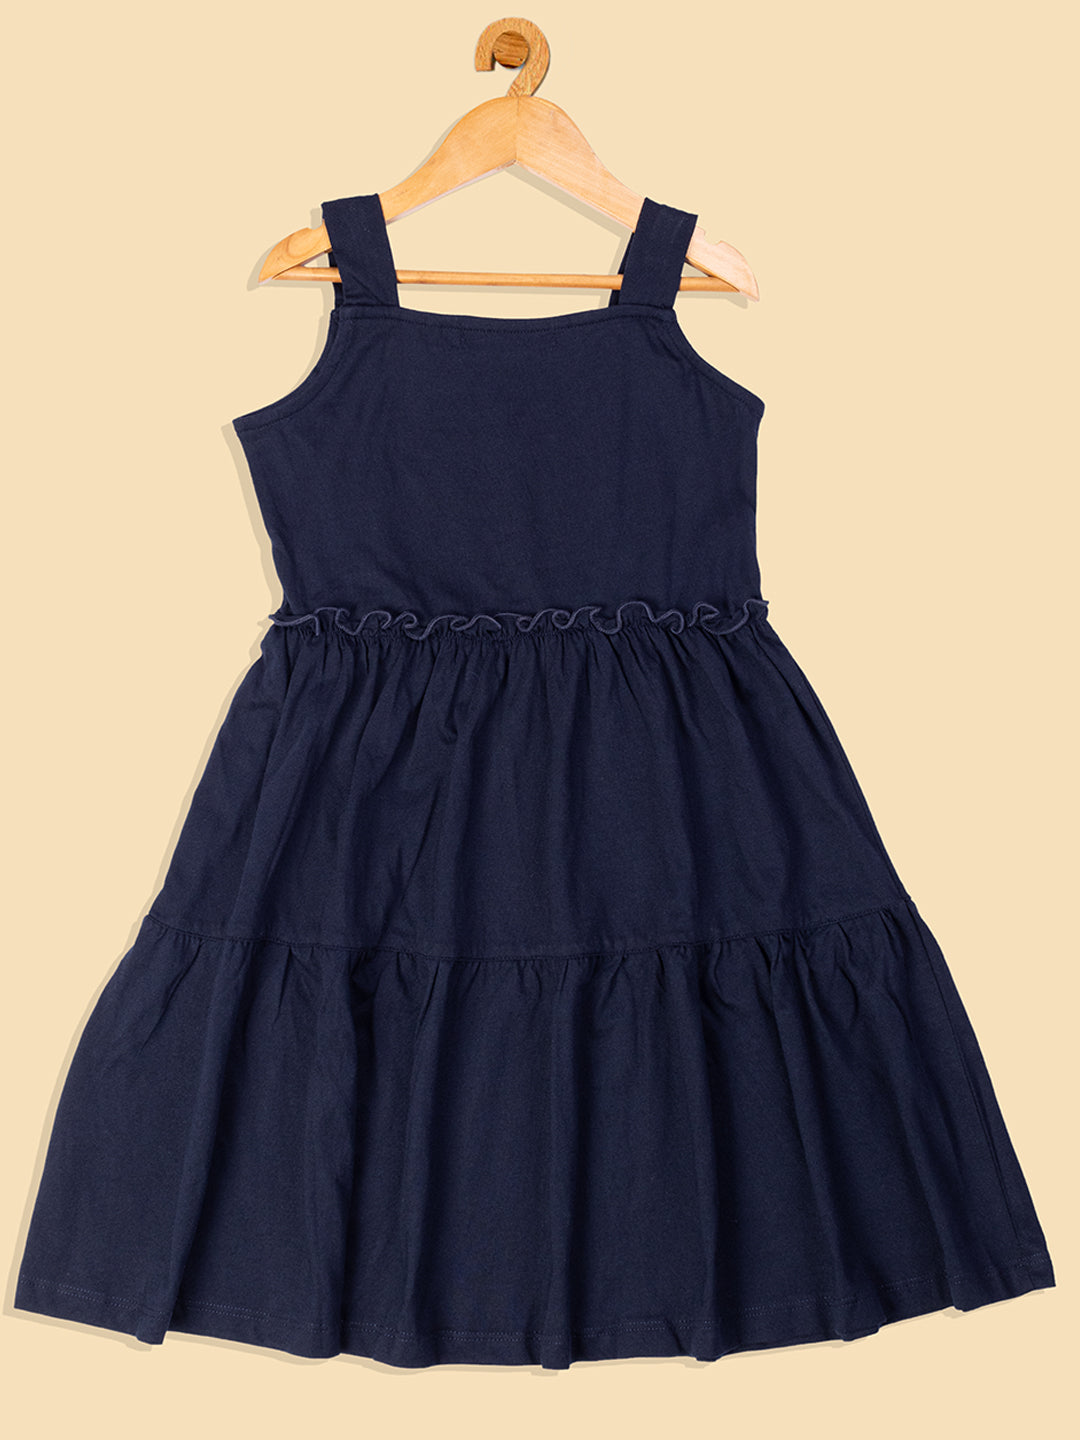 Pampolina  Printed Summer Cotton Dress For Baby Girl-Navy